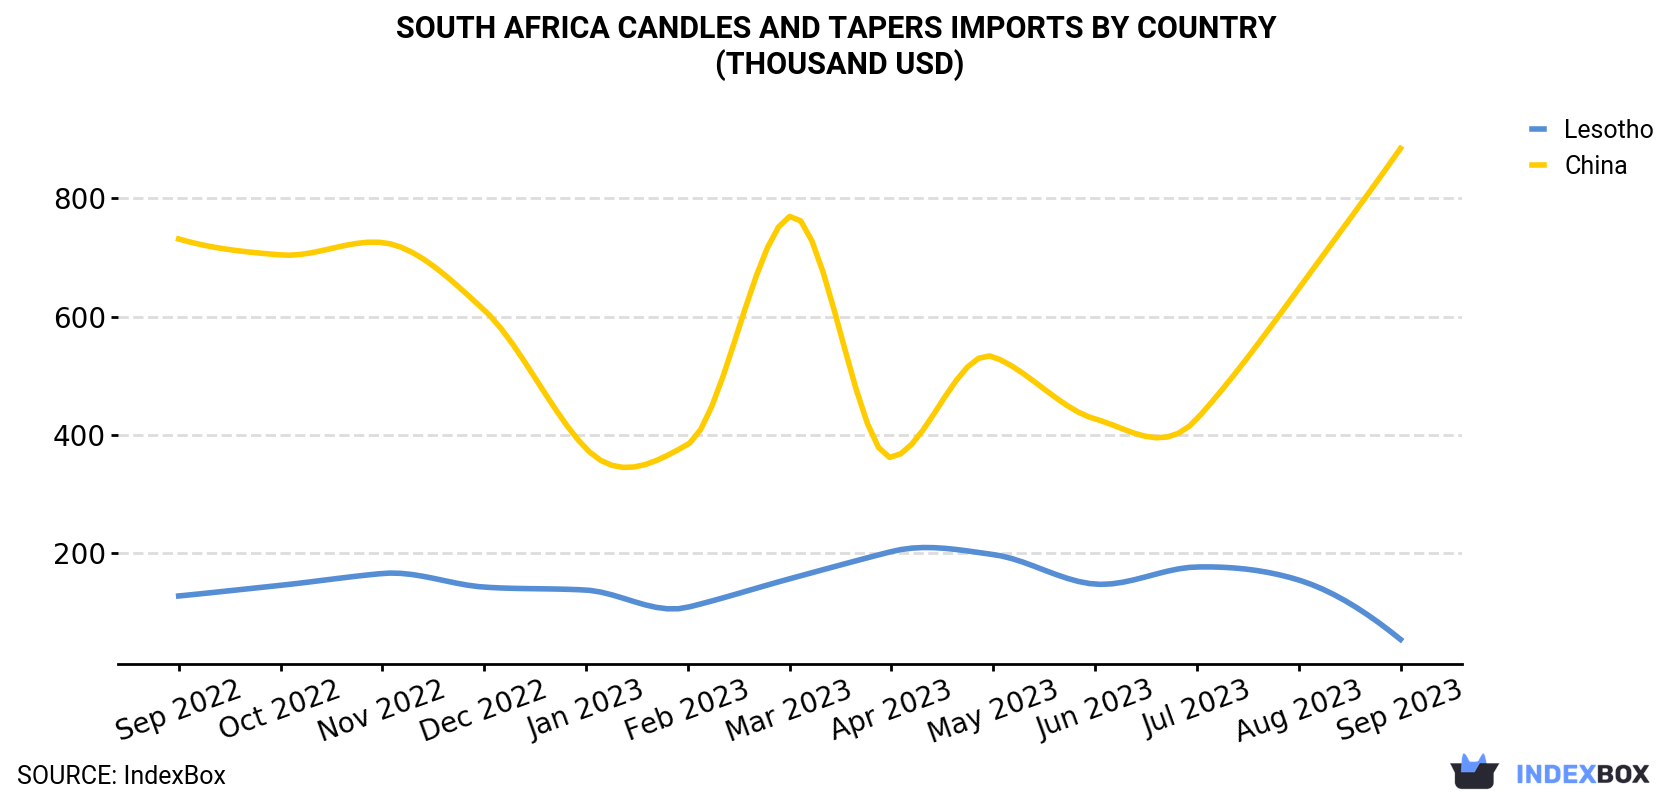 South Africa Candles And Tapers Imports By Country (Thousand USD)